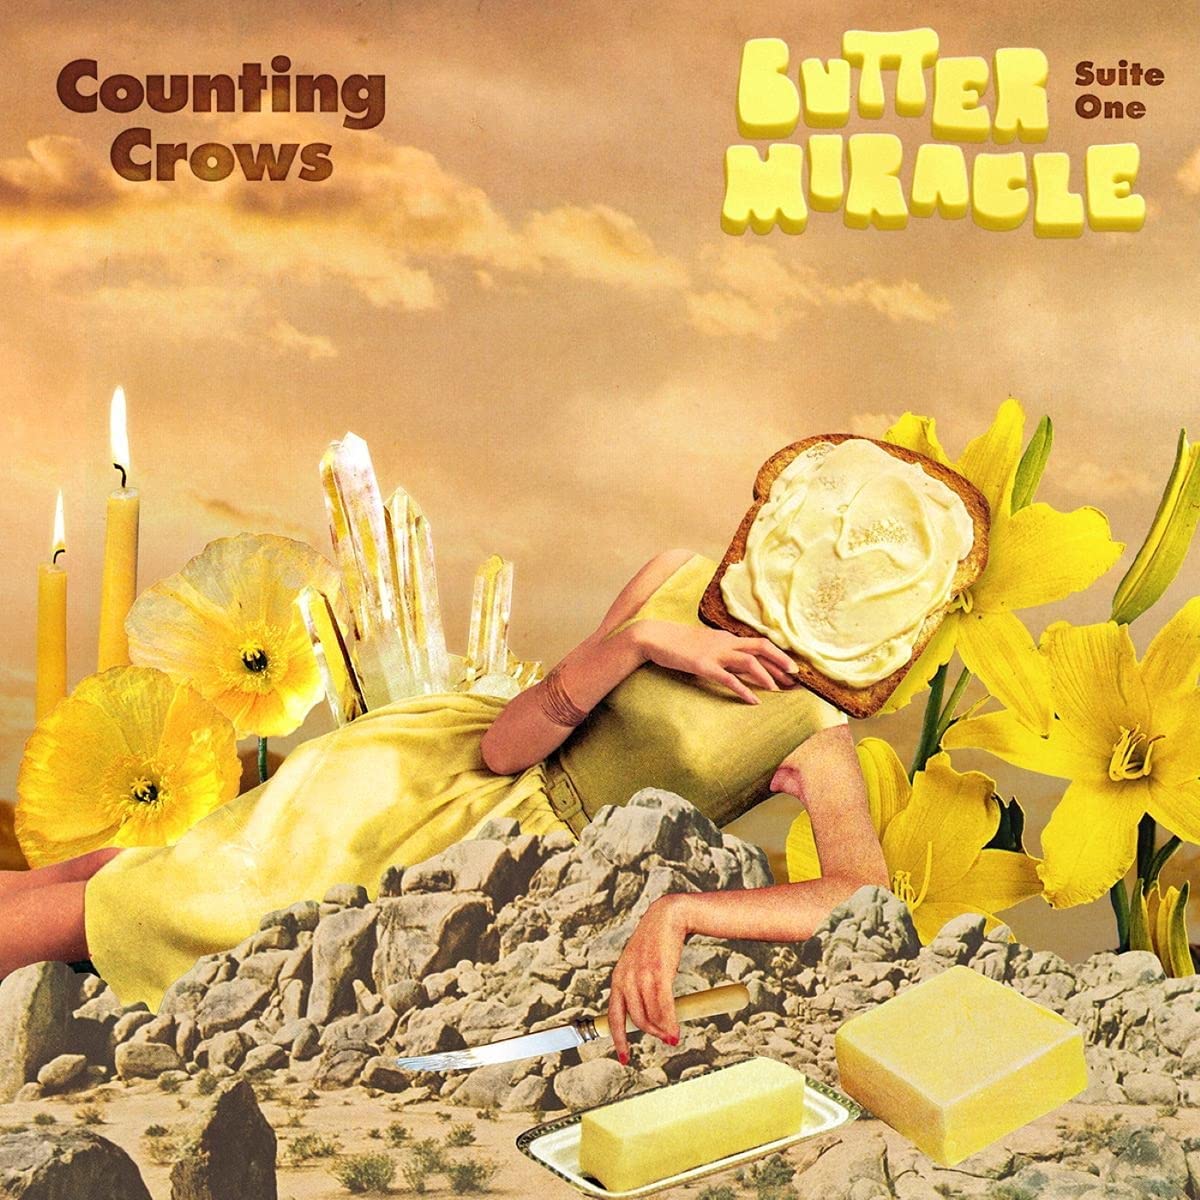 Counting Crows - Butter Miracle Suite One (Vinyl EP)